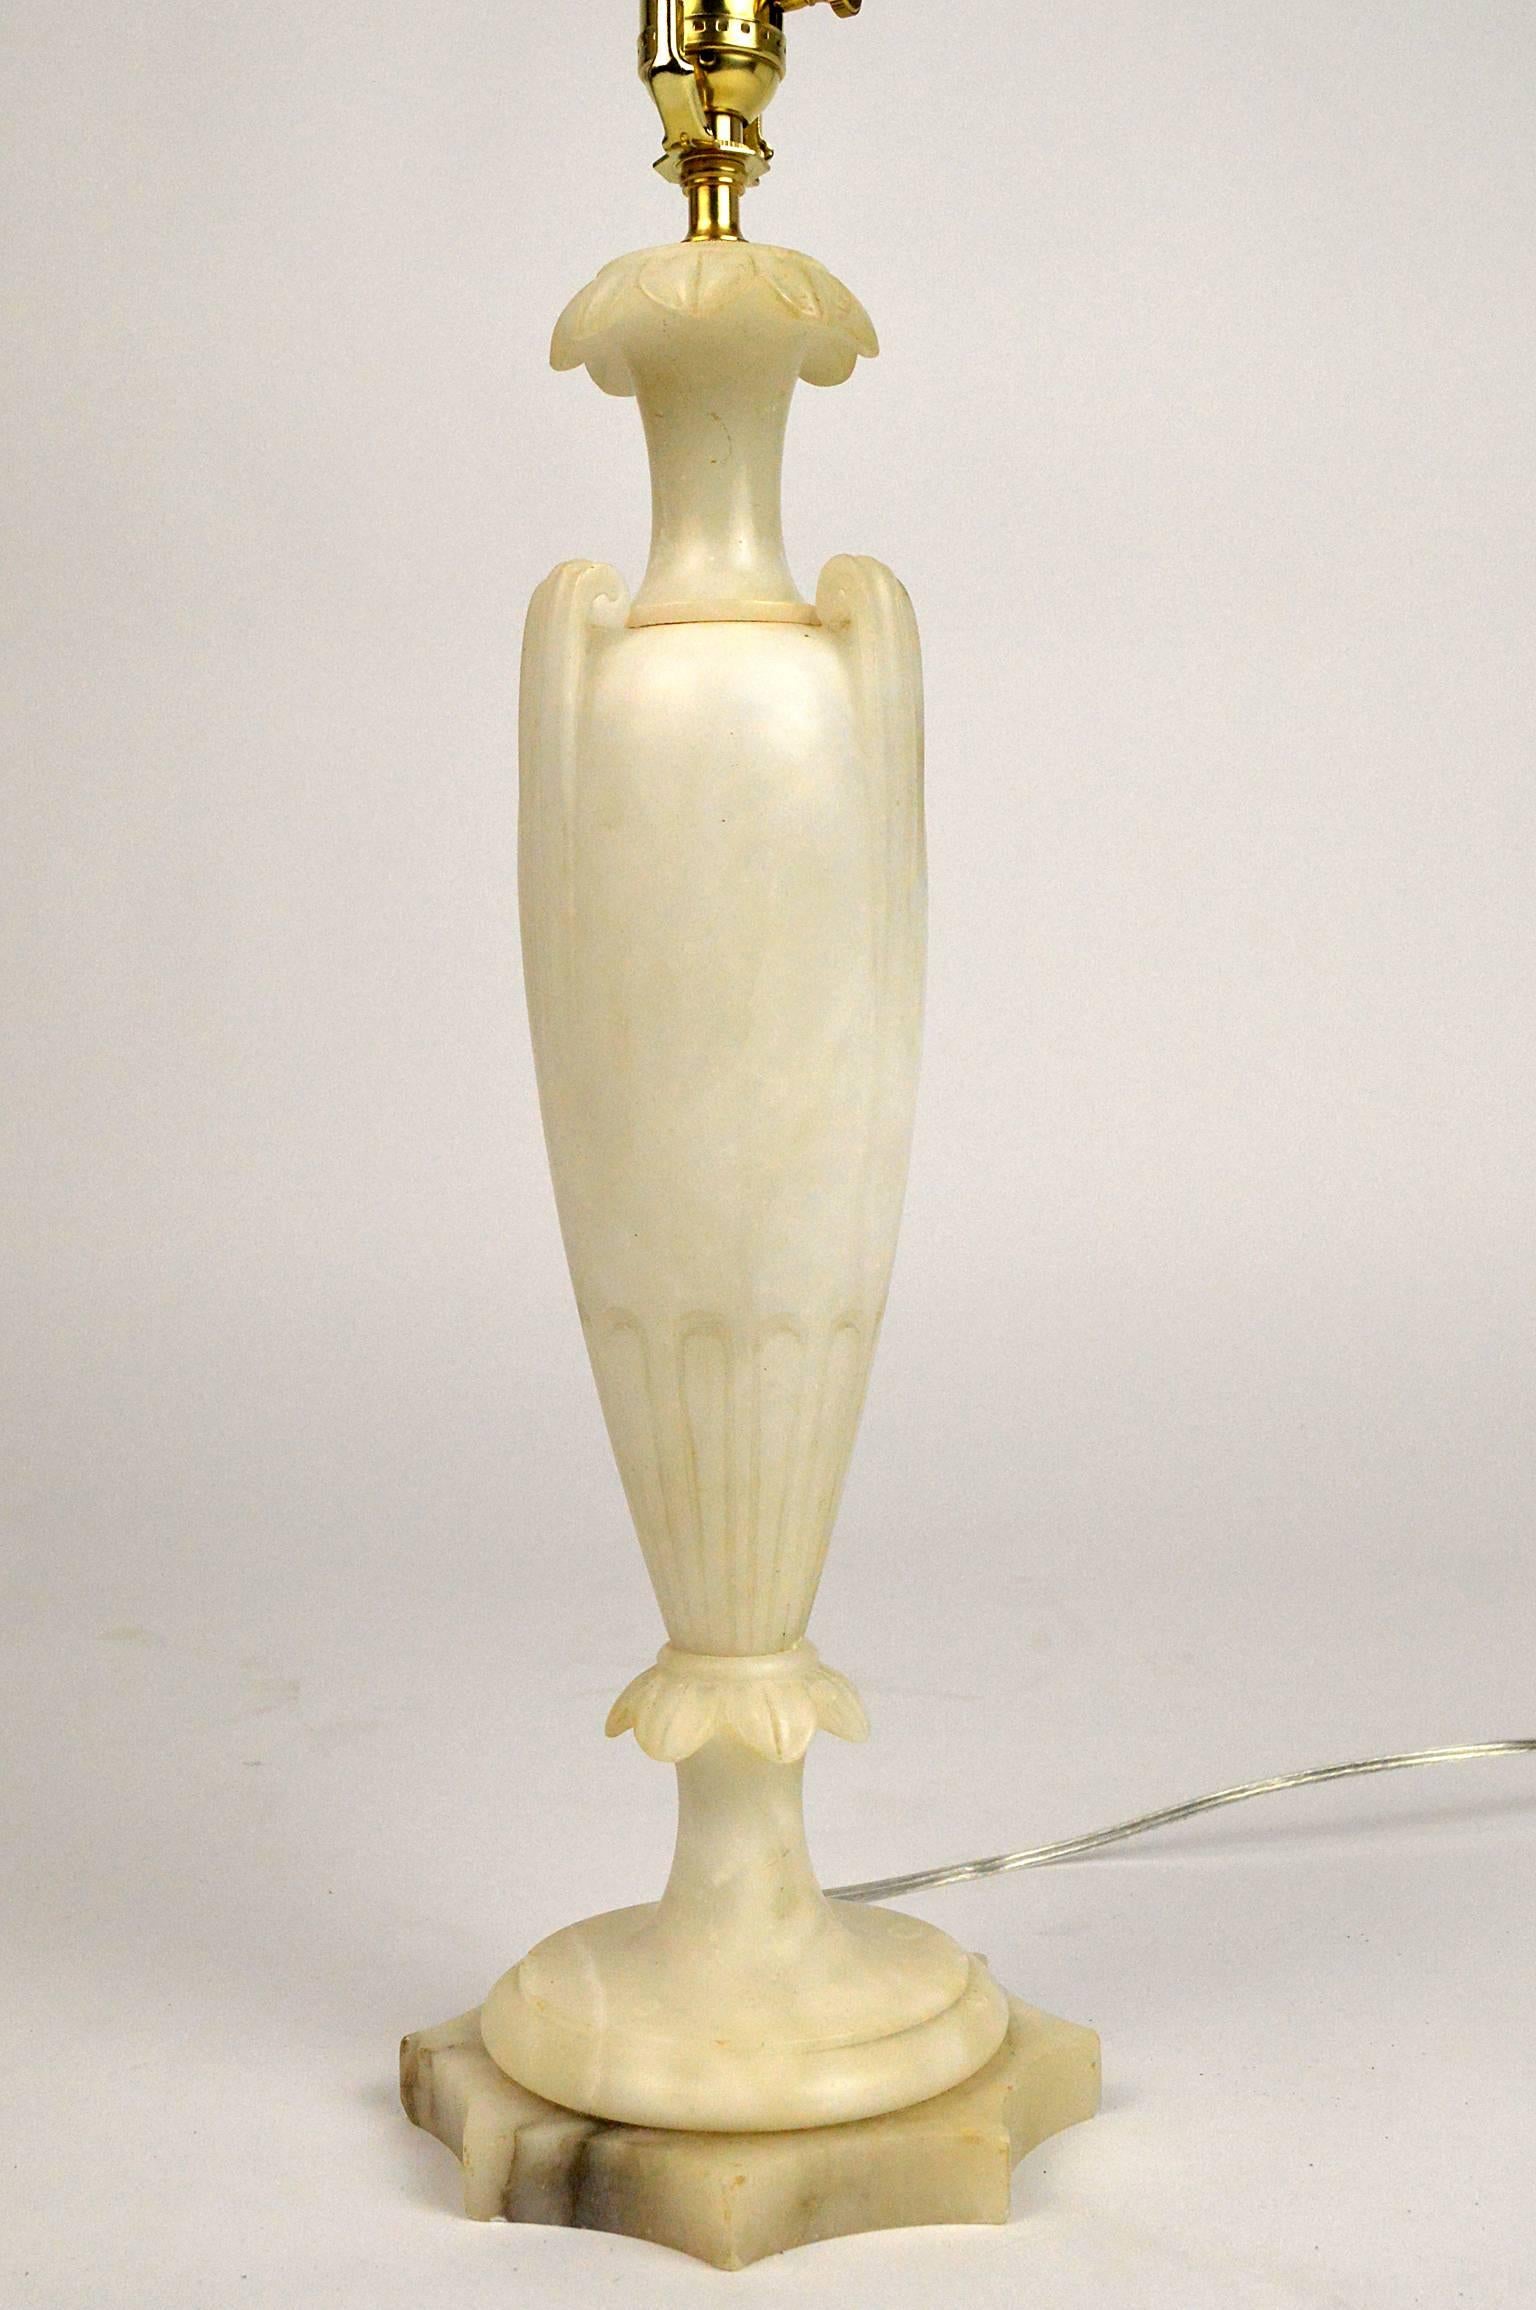 Neoclassical style Italian alabaster lamp with an slender urn form and leaf Silhouette. Overall ivory color and gray veining resting on a rounded star base.
Measures: 25.5